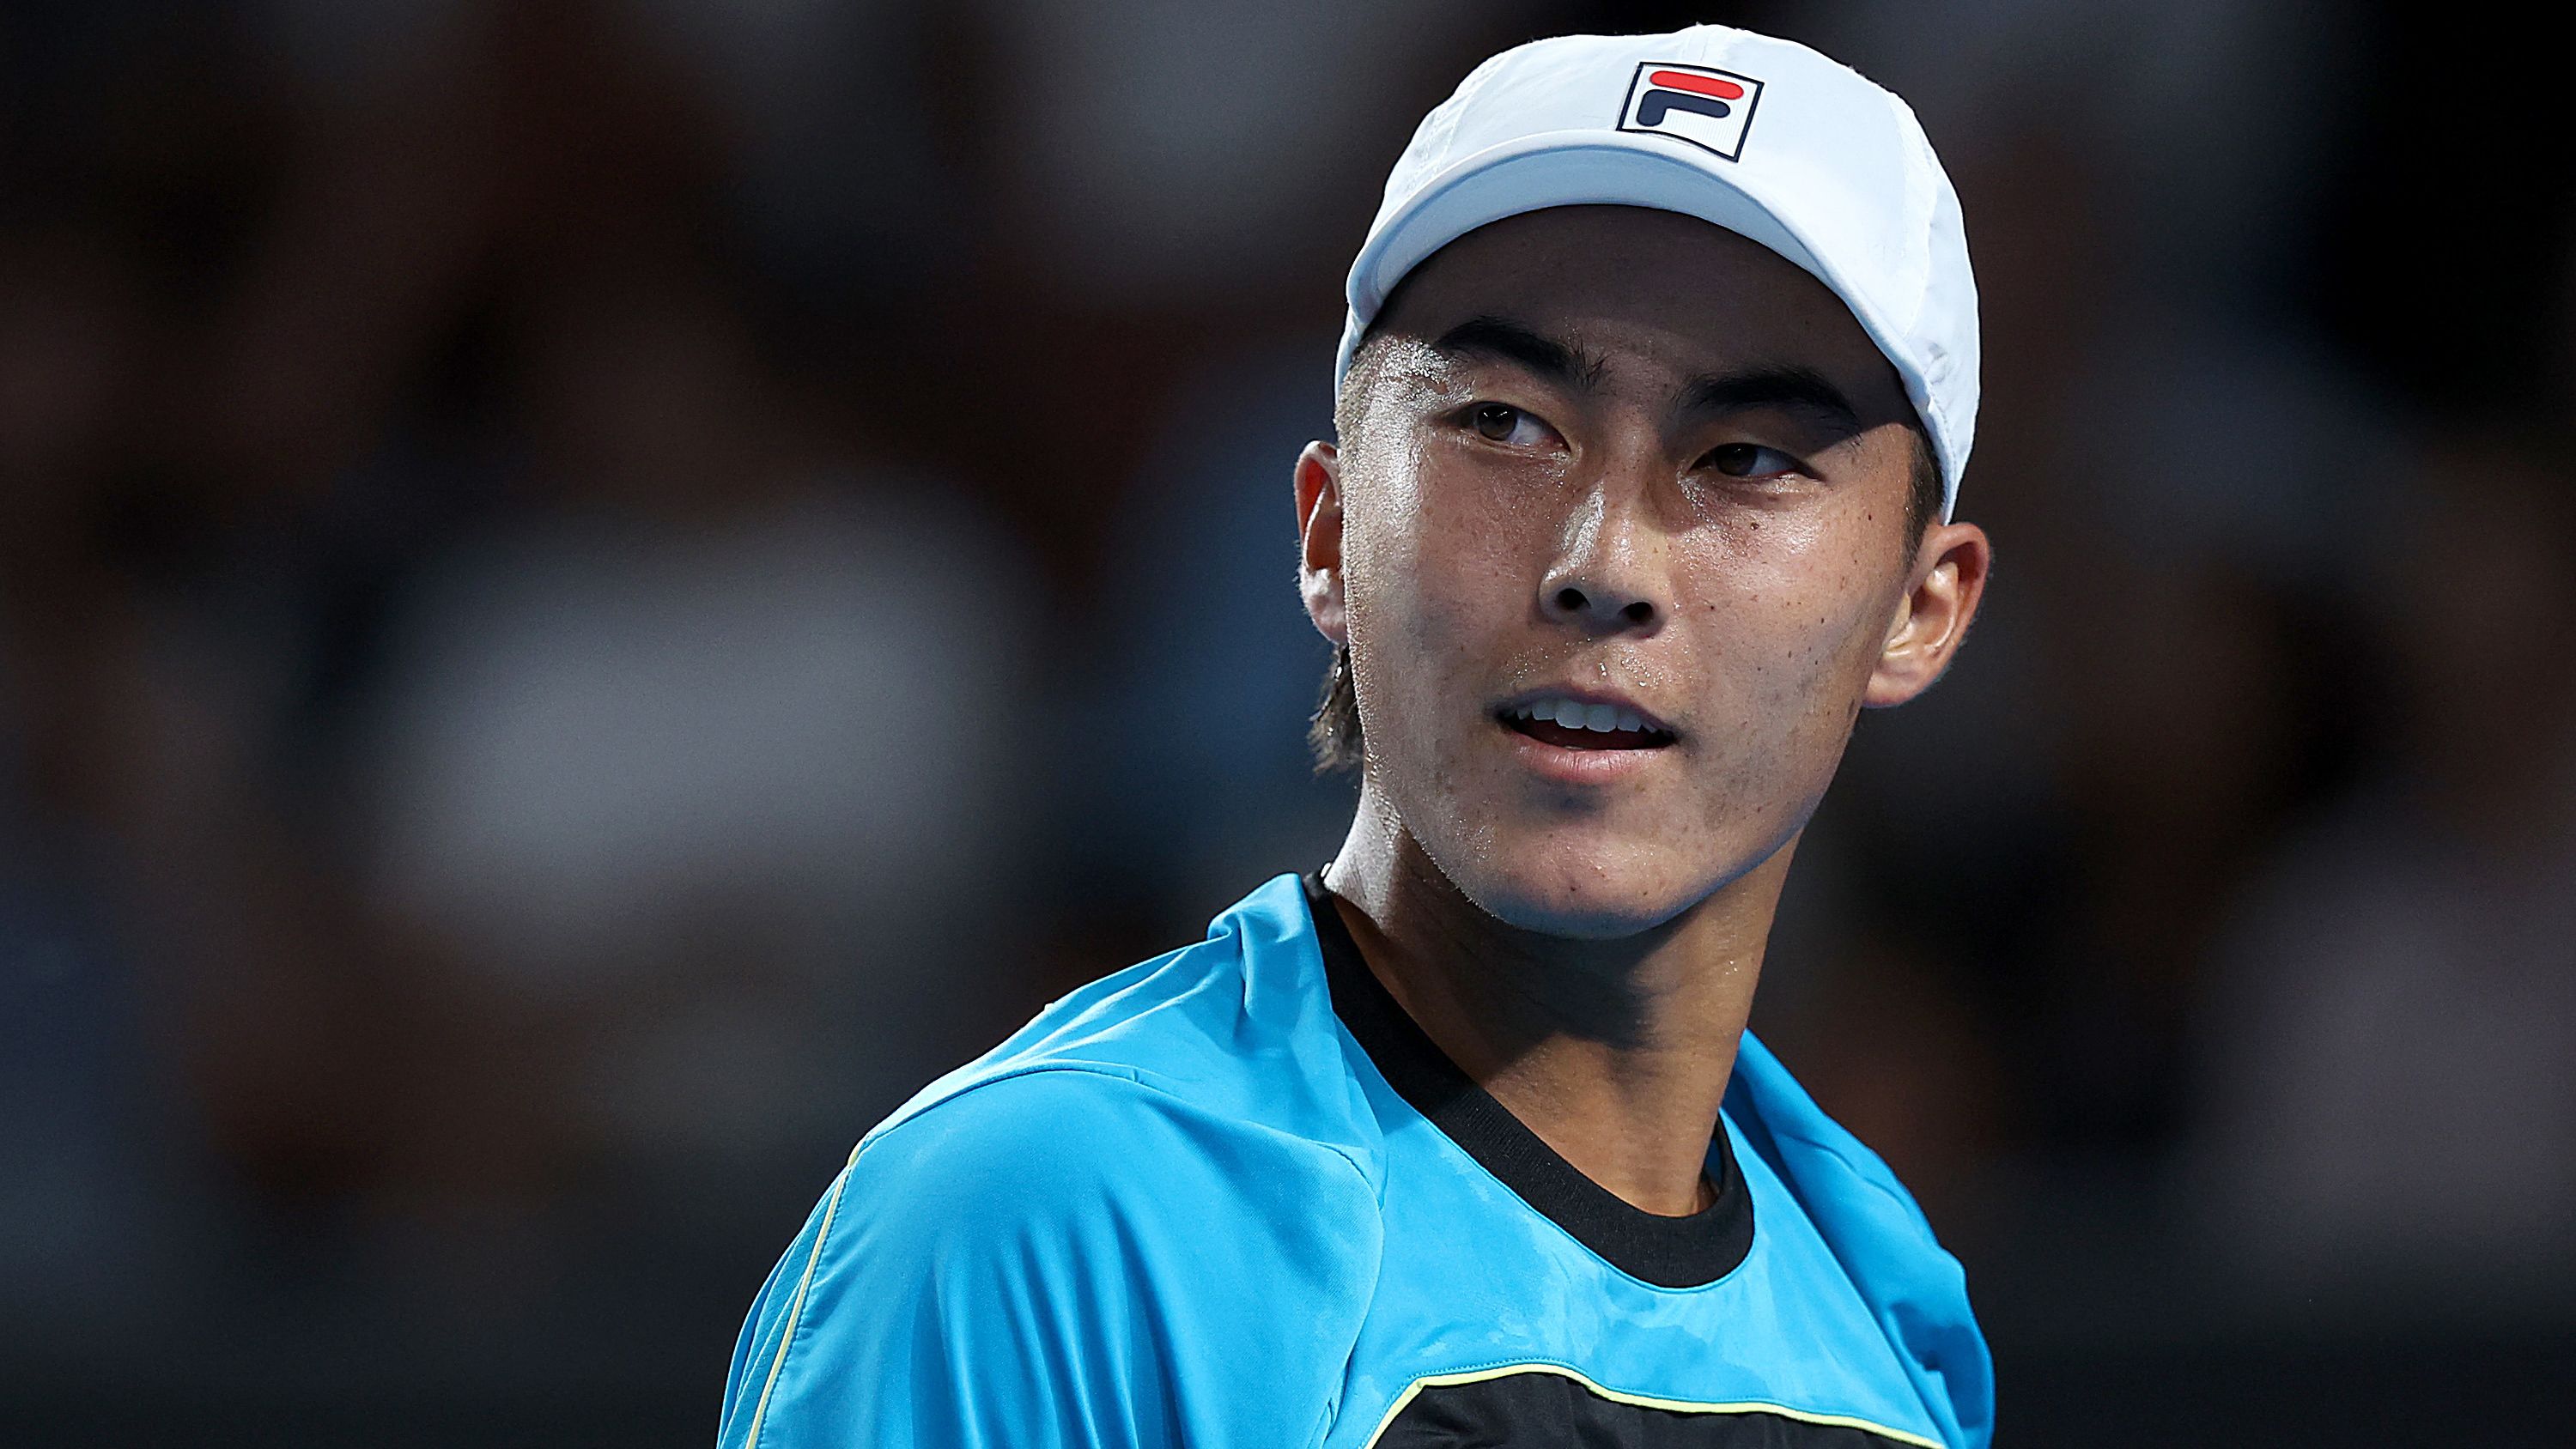 Rinky Hijikata of Australia looks on in their round one singles match against Jan-Lennard Struff of Germany during the 2024 Australian Open at Melbourne Park on January 15, 2024 in Melbourne, Australia. (Photo by Daniel Pockett/Getty Images)